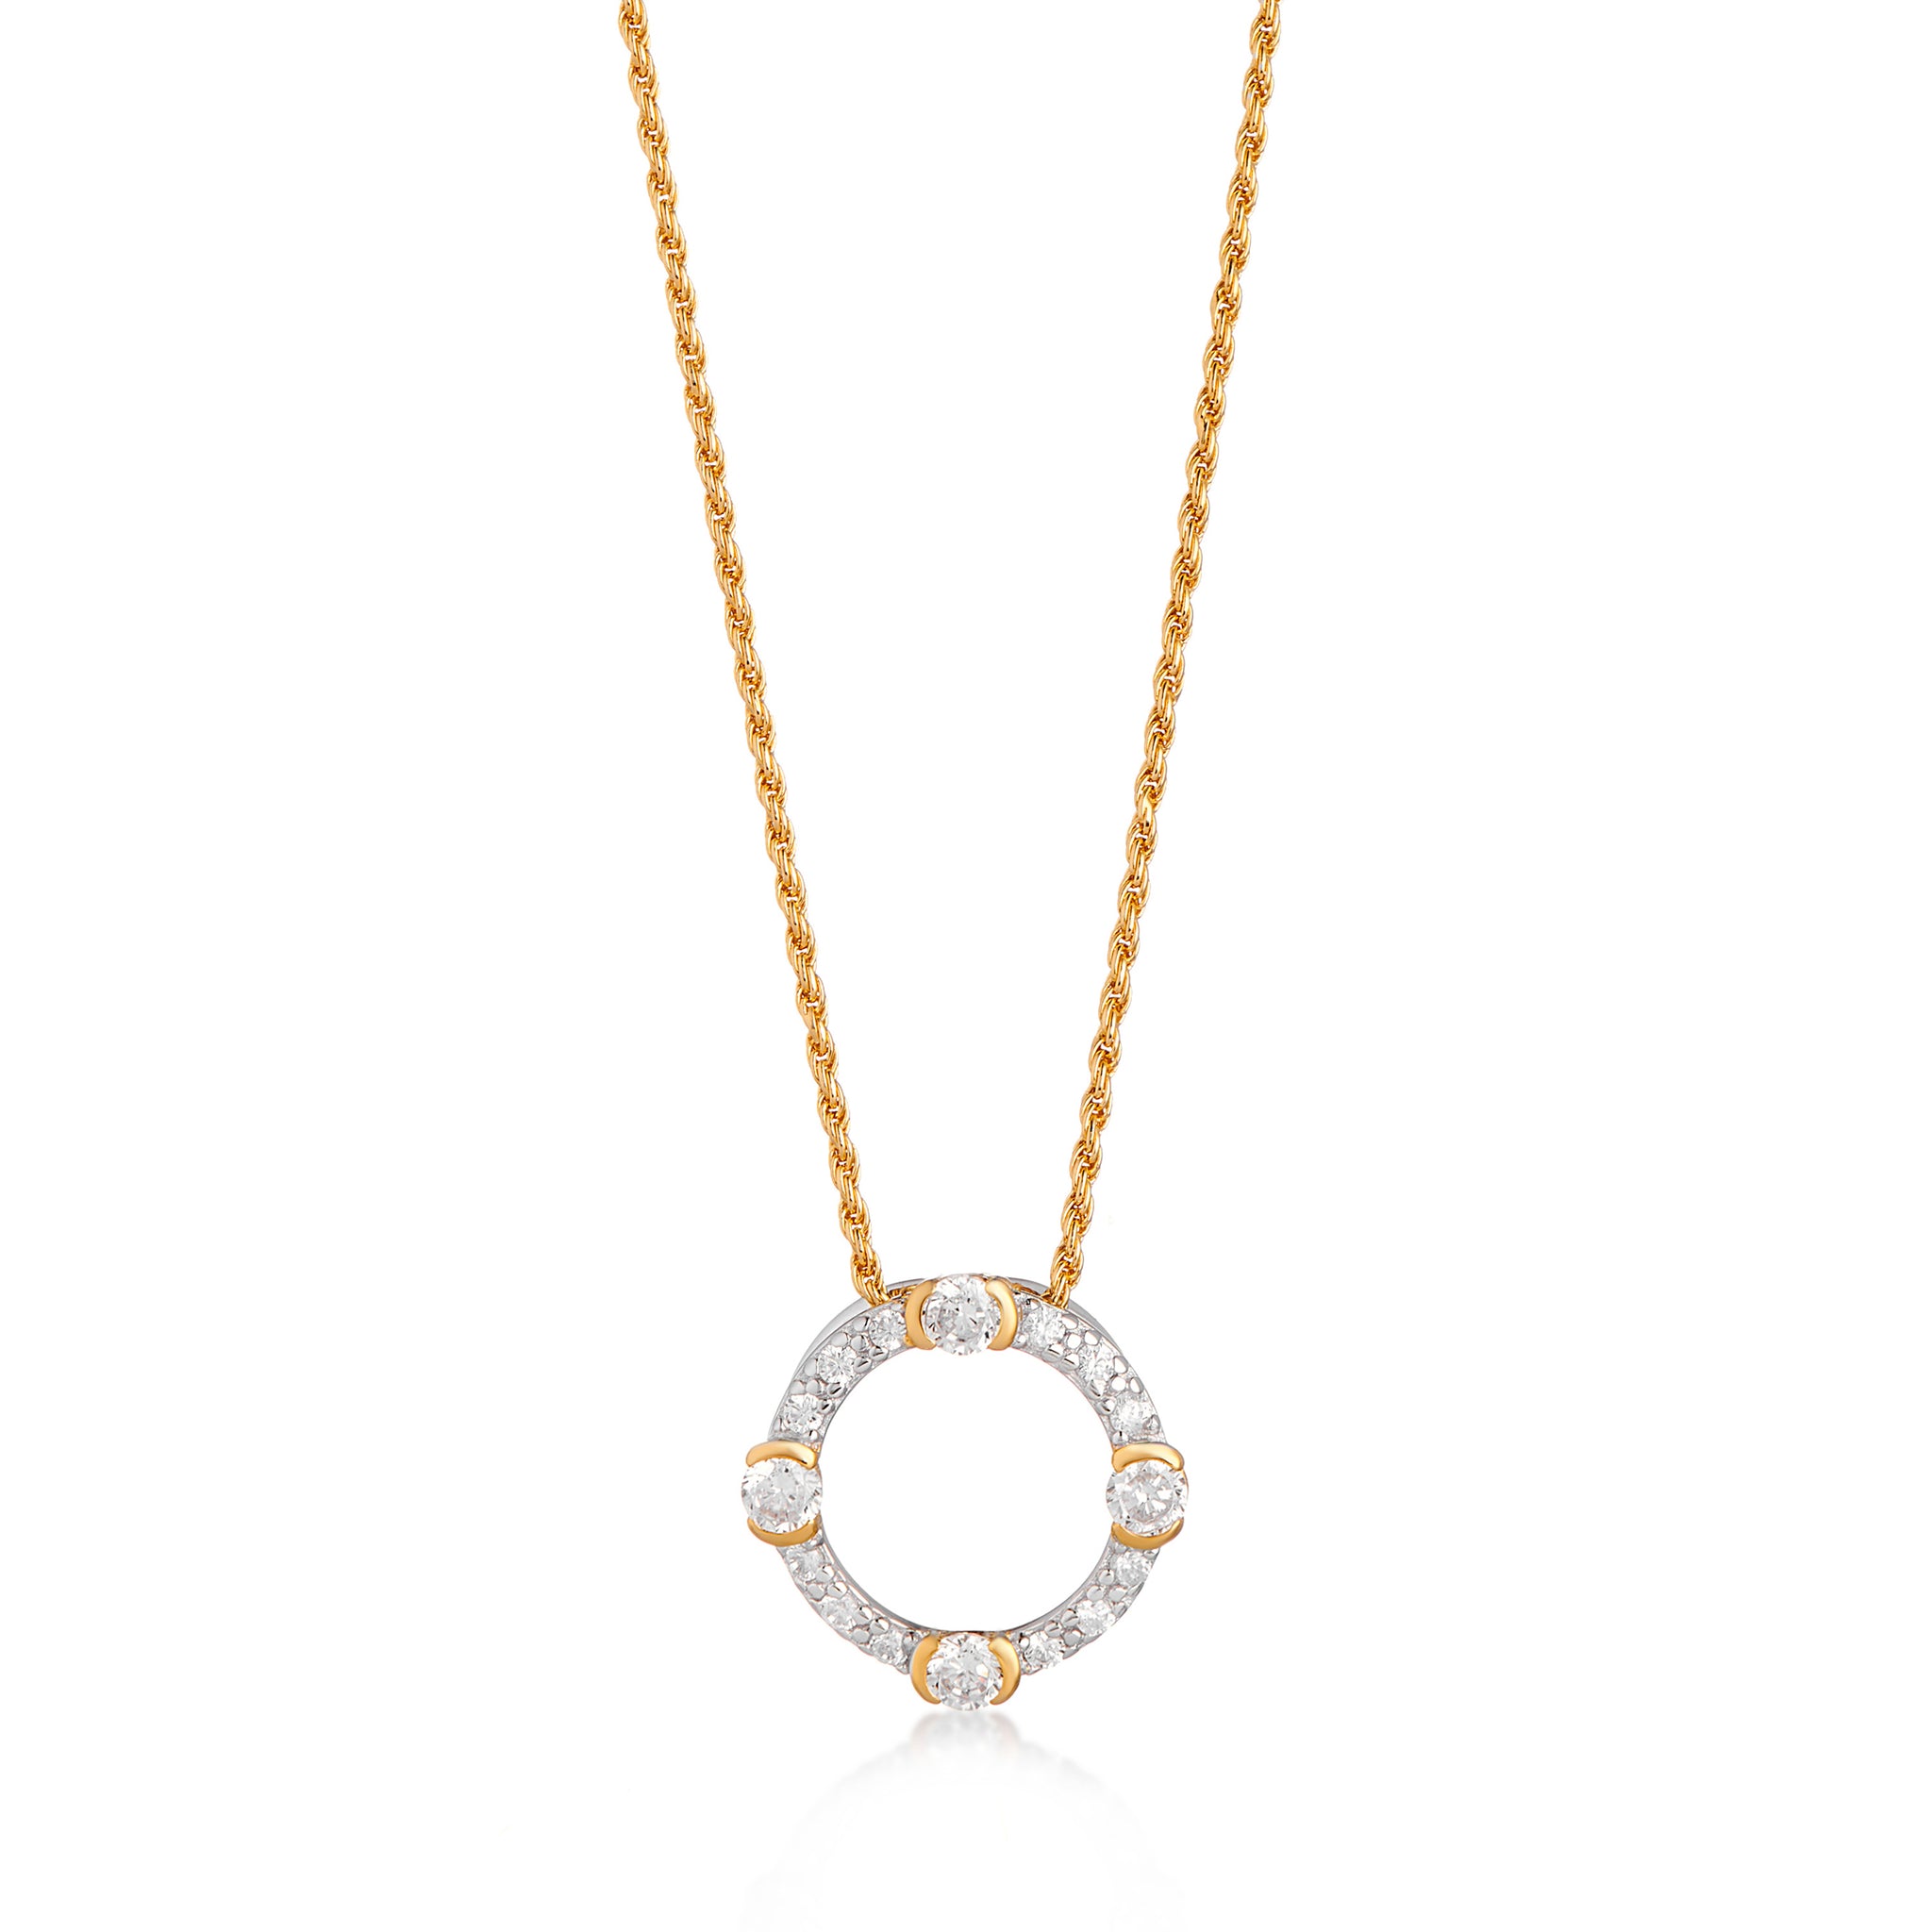 Diamond and 9ct Gold Necklace, Hammered Solid Gold Circle Pendant, 0.16ct  Diamond Necklace in 9ct Gold - Etsy